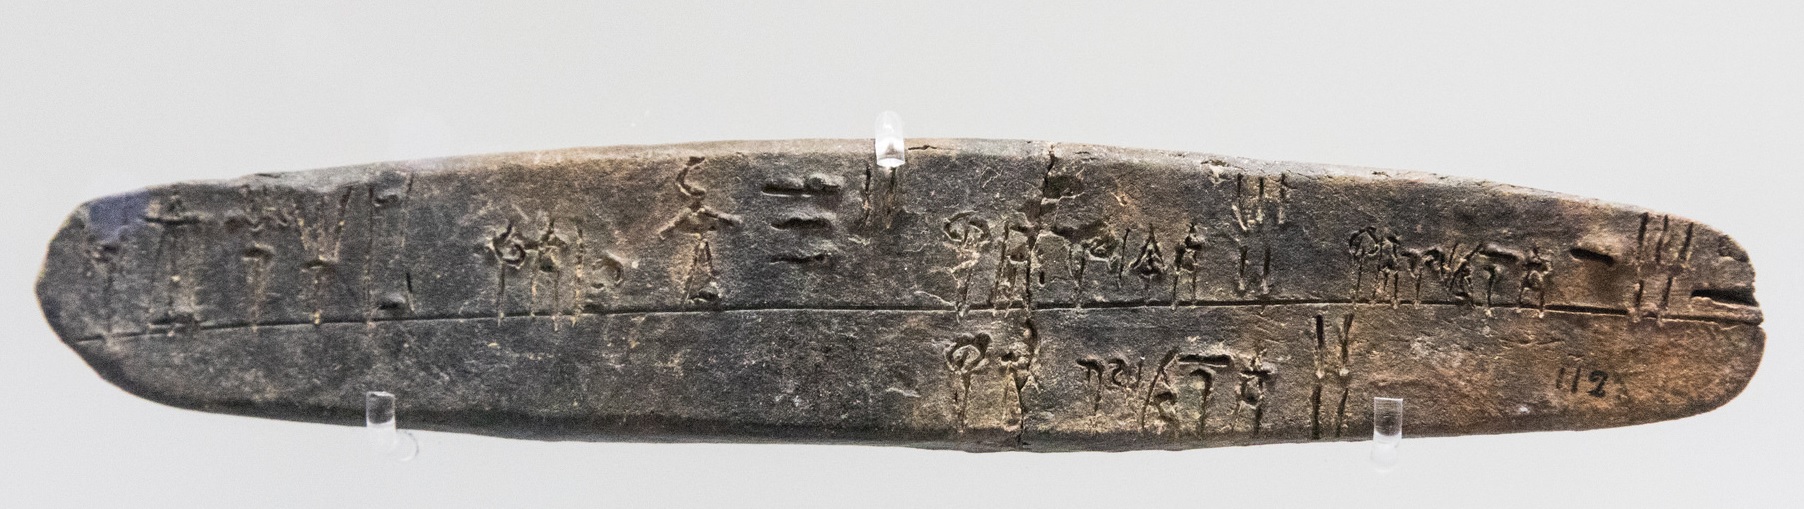 Linear B tablet, Knossos female workers tablet large, image courtesy of Rupert Thompson